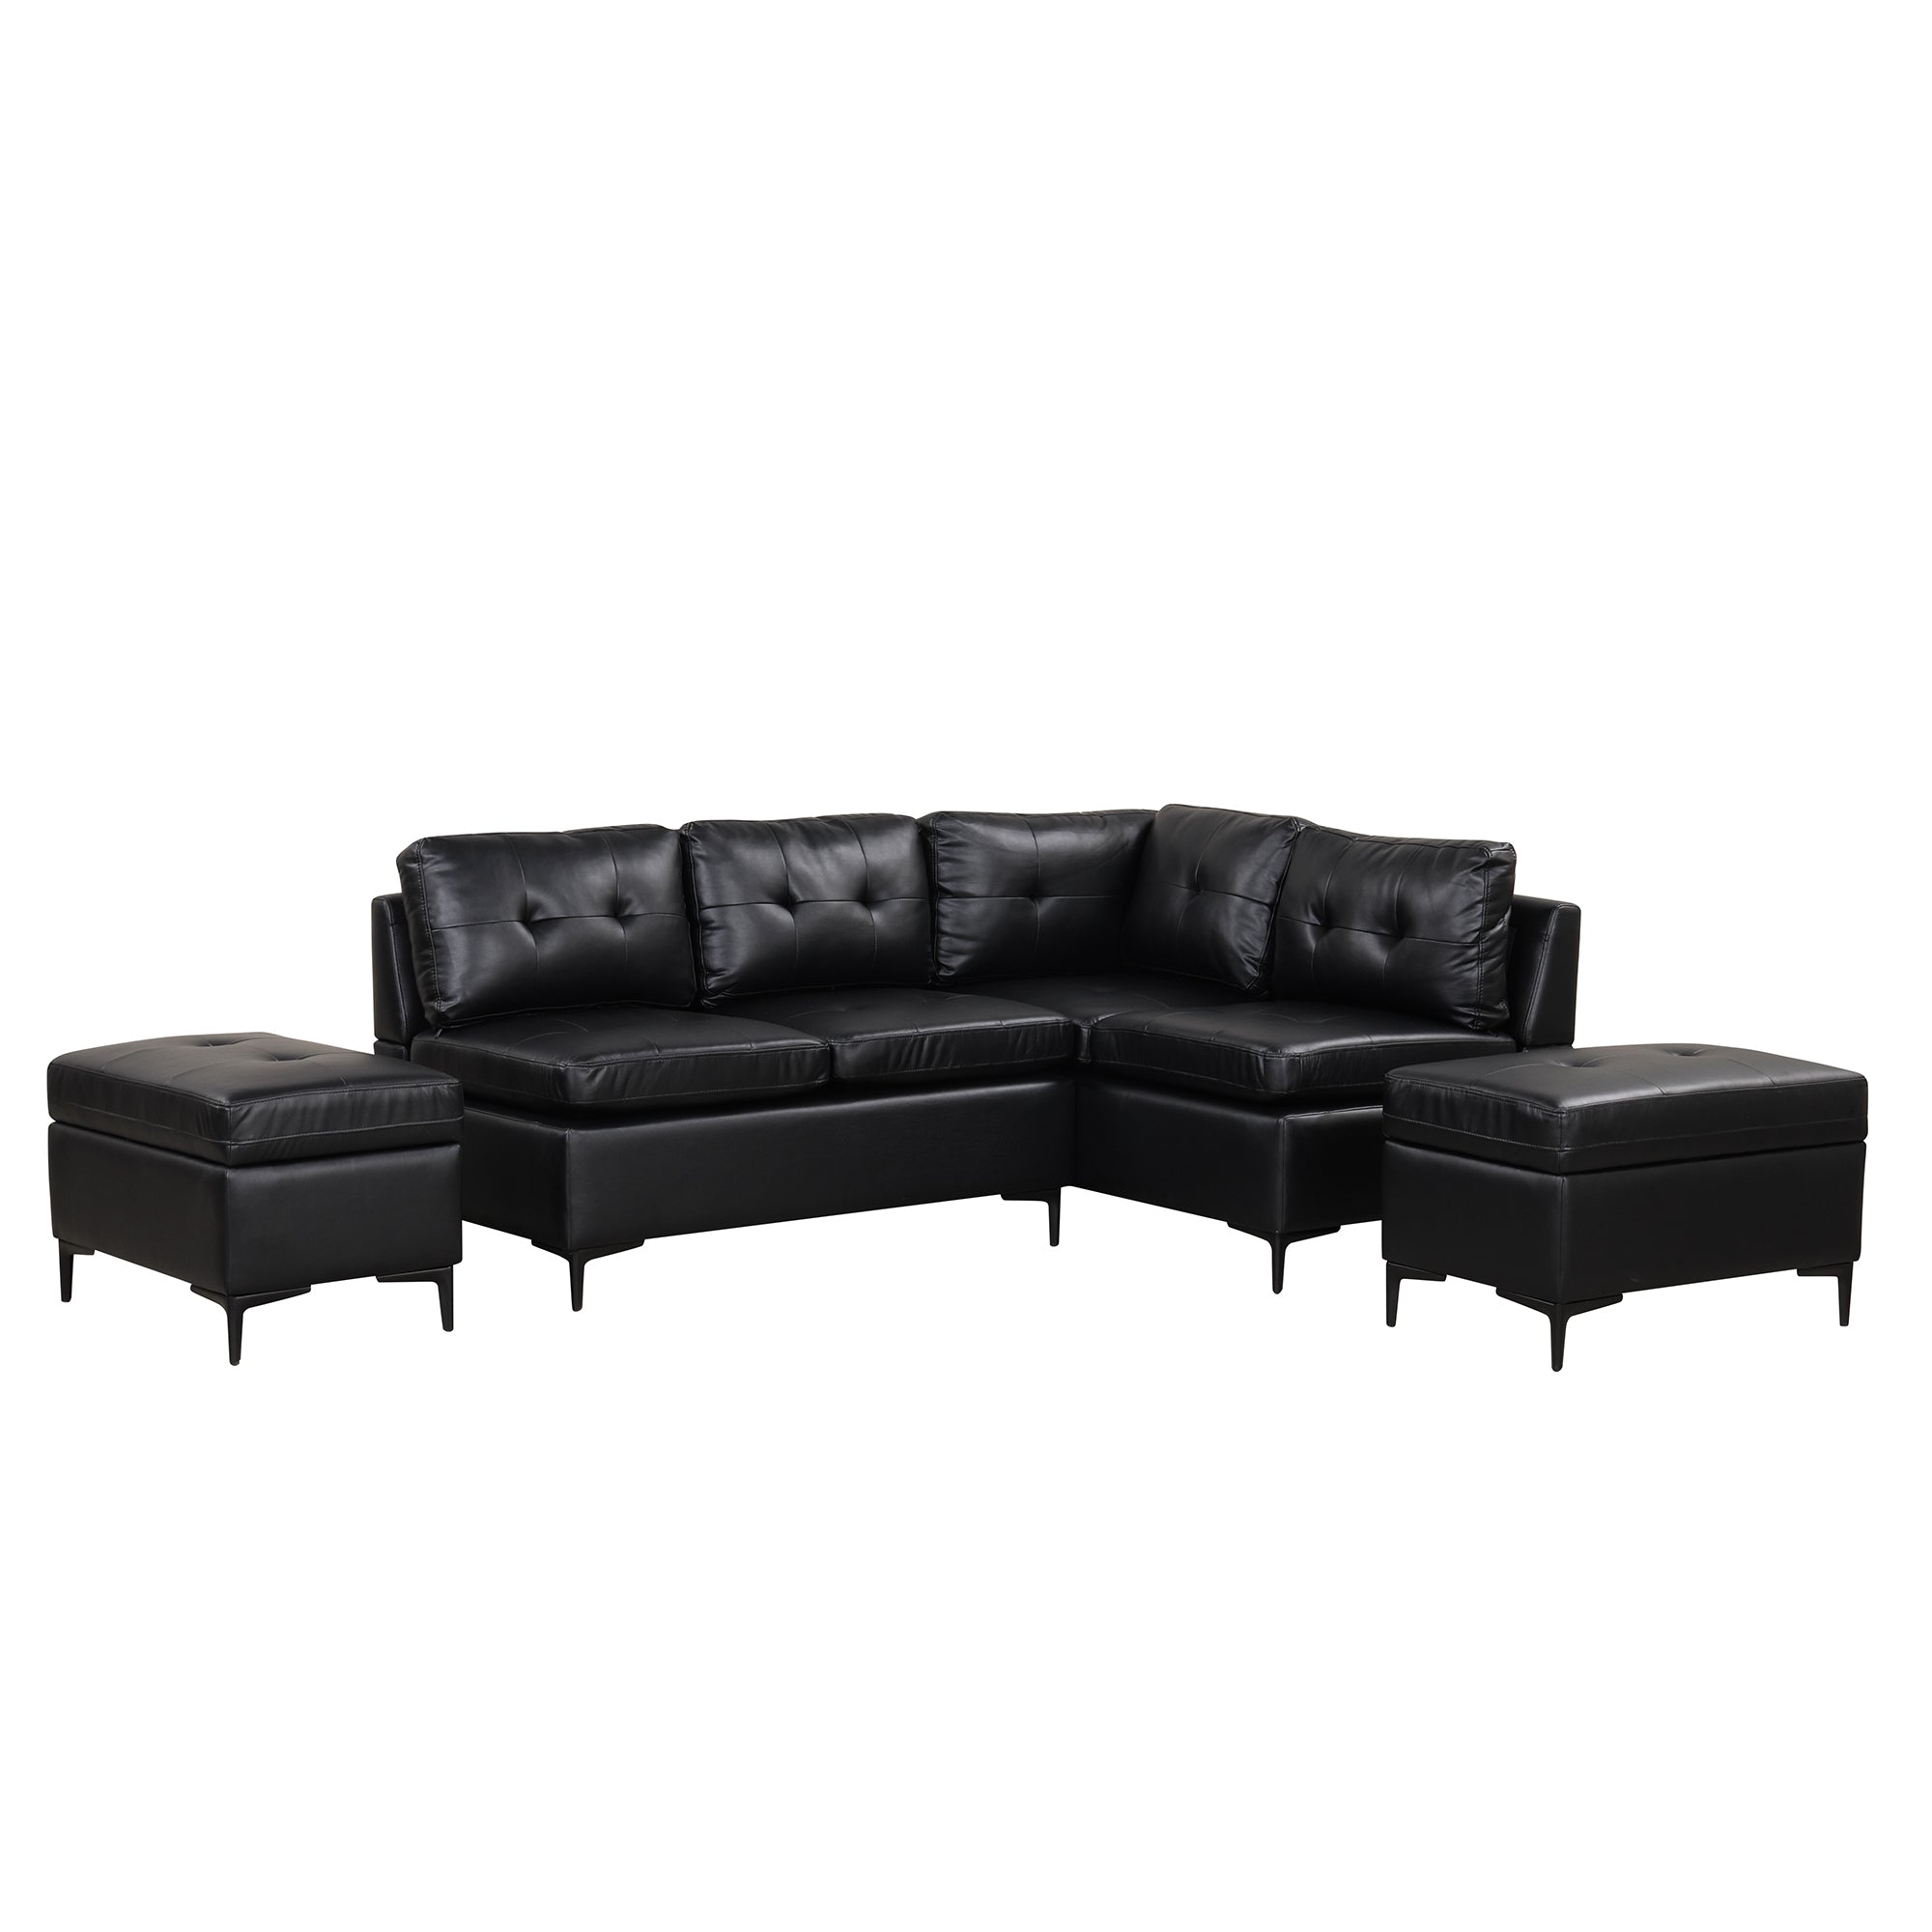 94.88" Black PU Leather L-Shaped Sectional Sofa with Storage Ottomans-Stationary Sectionals-American Furniture Outlet